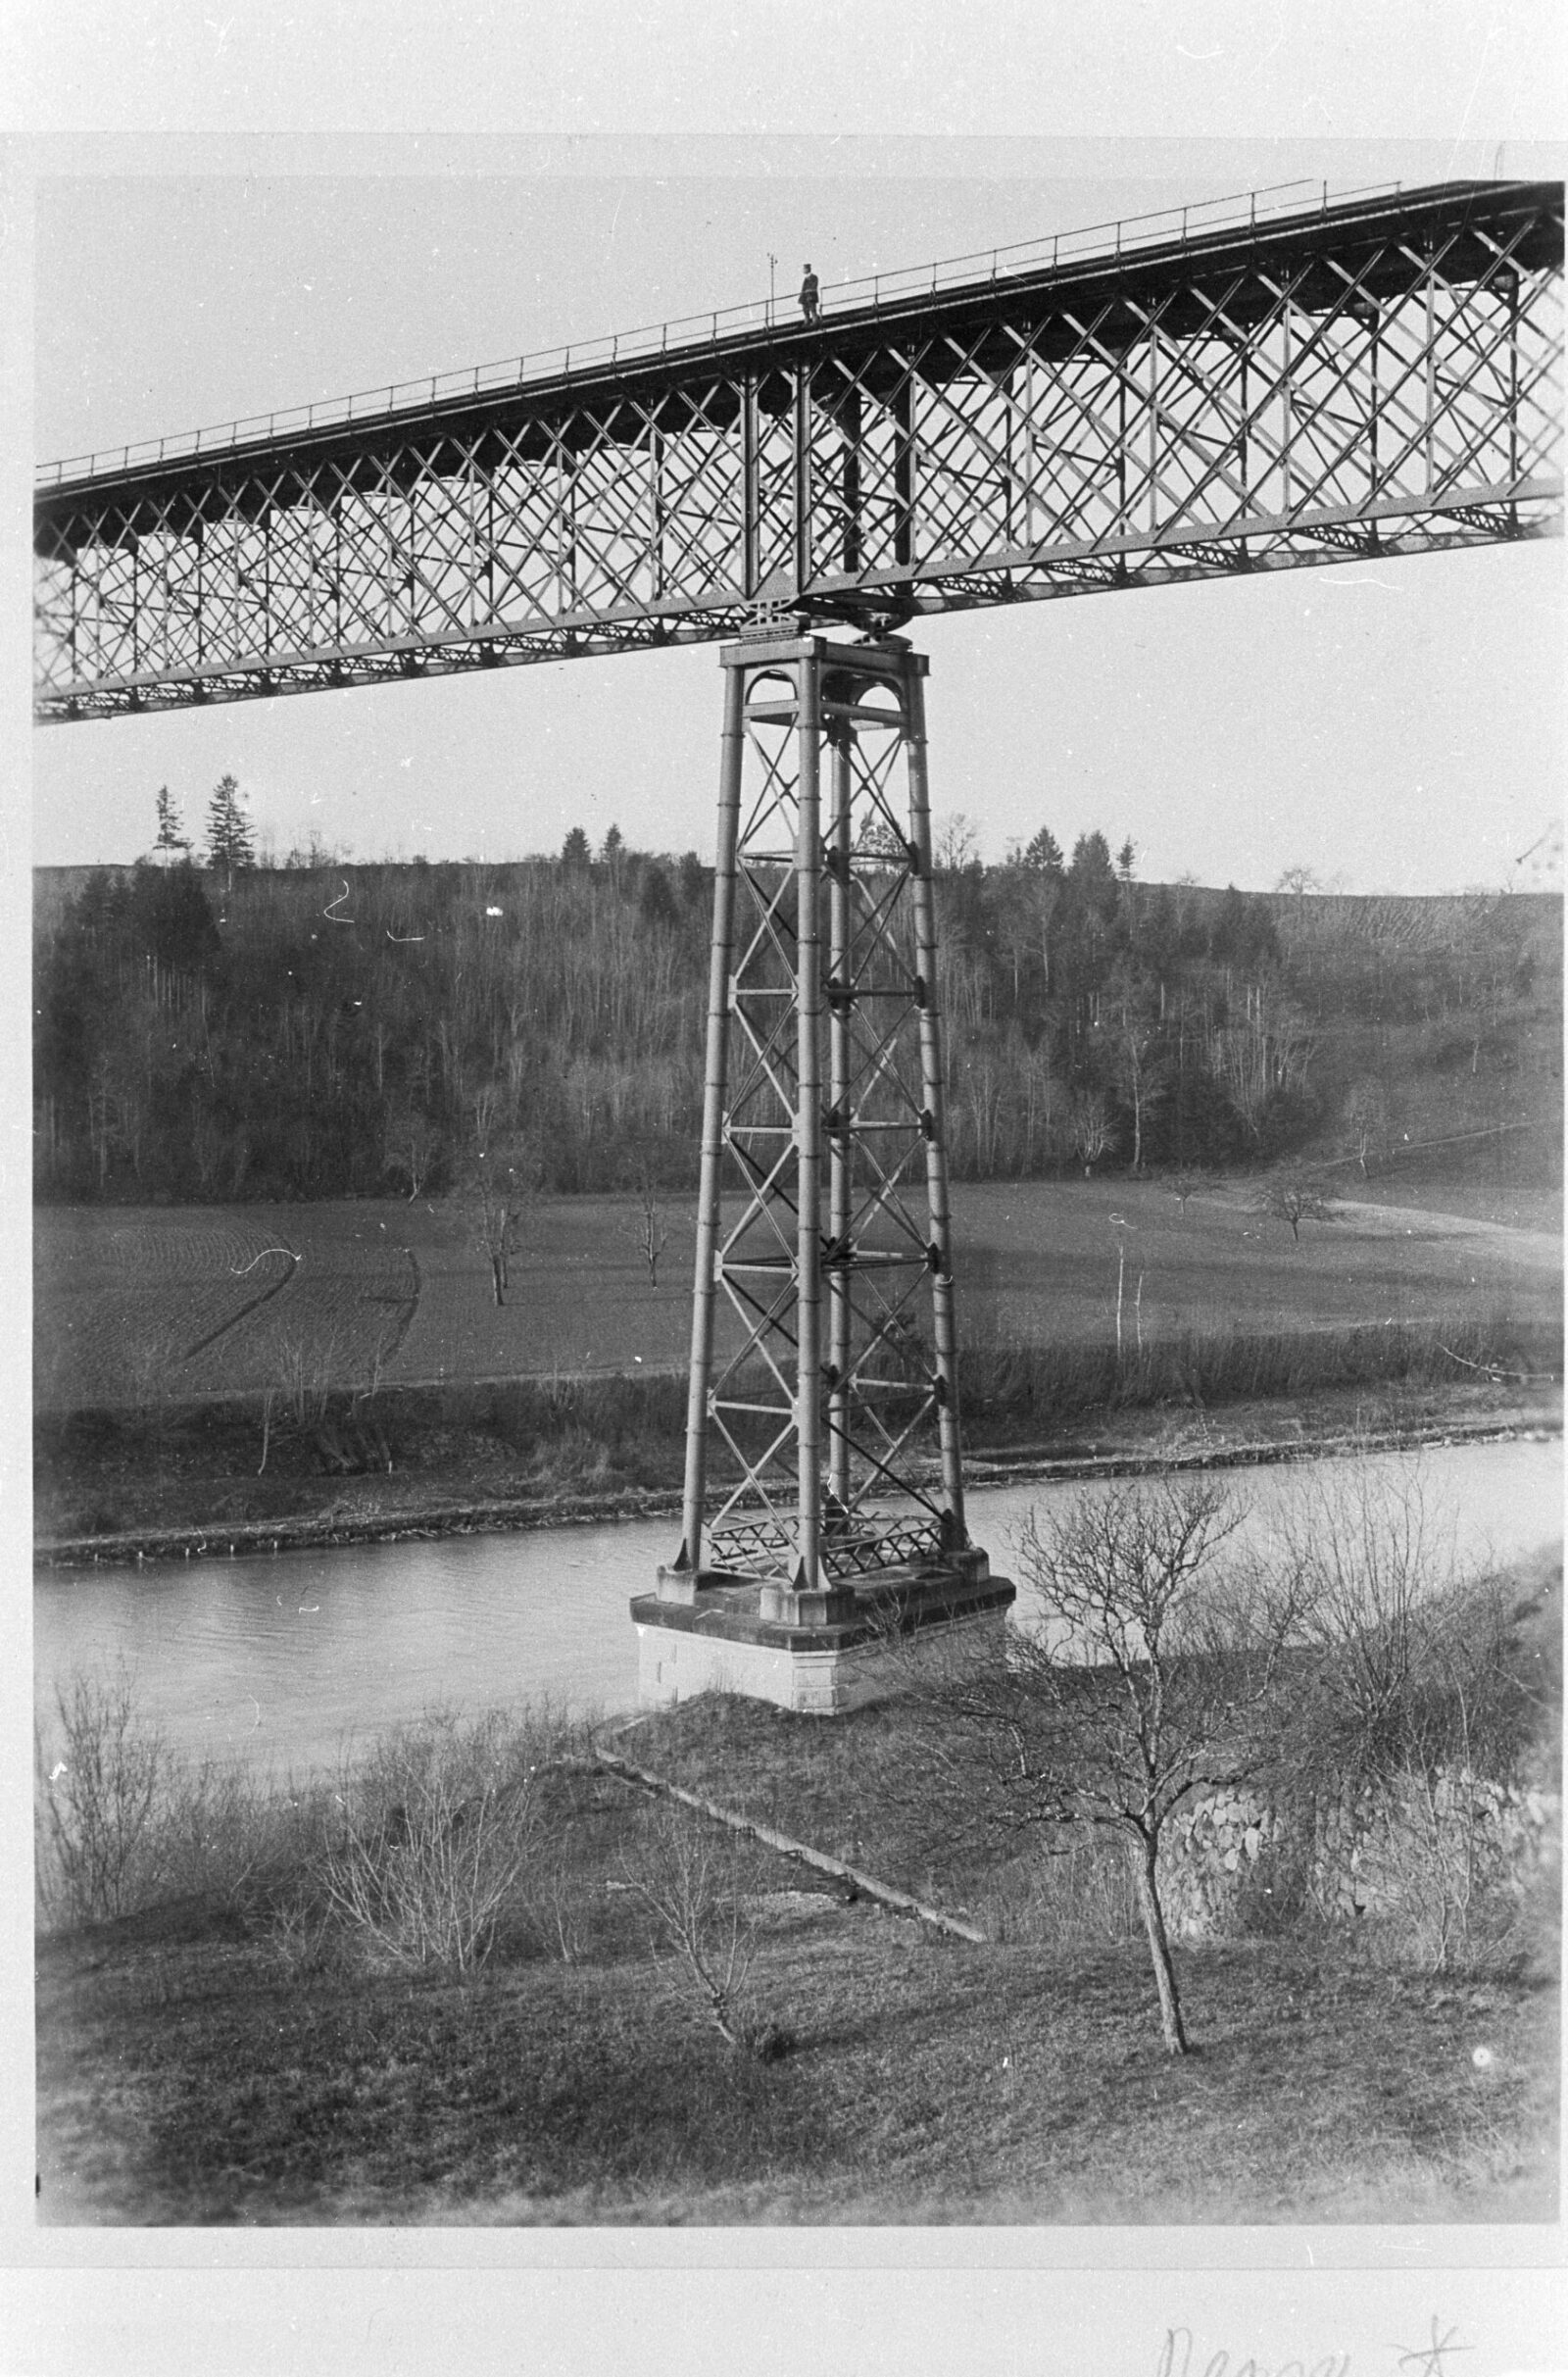 The Thur-Ossingen Bridge near Stein am Rhein, which opened in 1875, was one of Europe’s first railway bridges with wrought-iron supporting pillars. As a precaution, the Swiss Federal Railways closed the listed bridge in 2021 in order to have its structural safety tested by ETH experts.